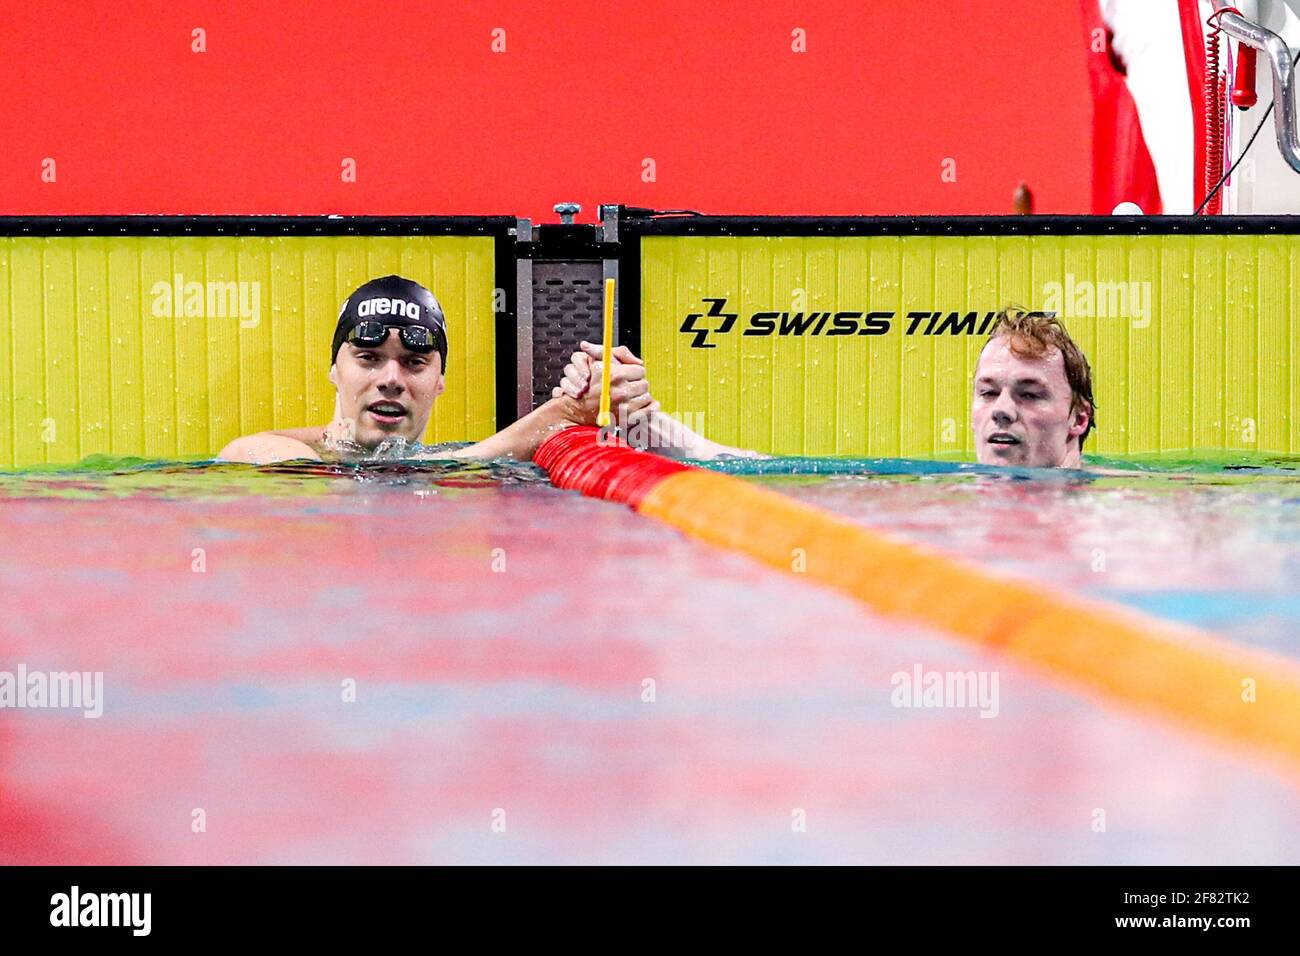 EINDHOVEN, NETHERLANDS - APRIL 11: Maximilian Pilger, Arjan Knipping competing in the Men 200m Breaststroke during the Eindhoven Qualification Meet at Stock Photo